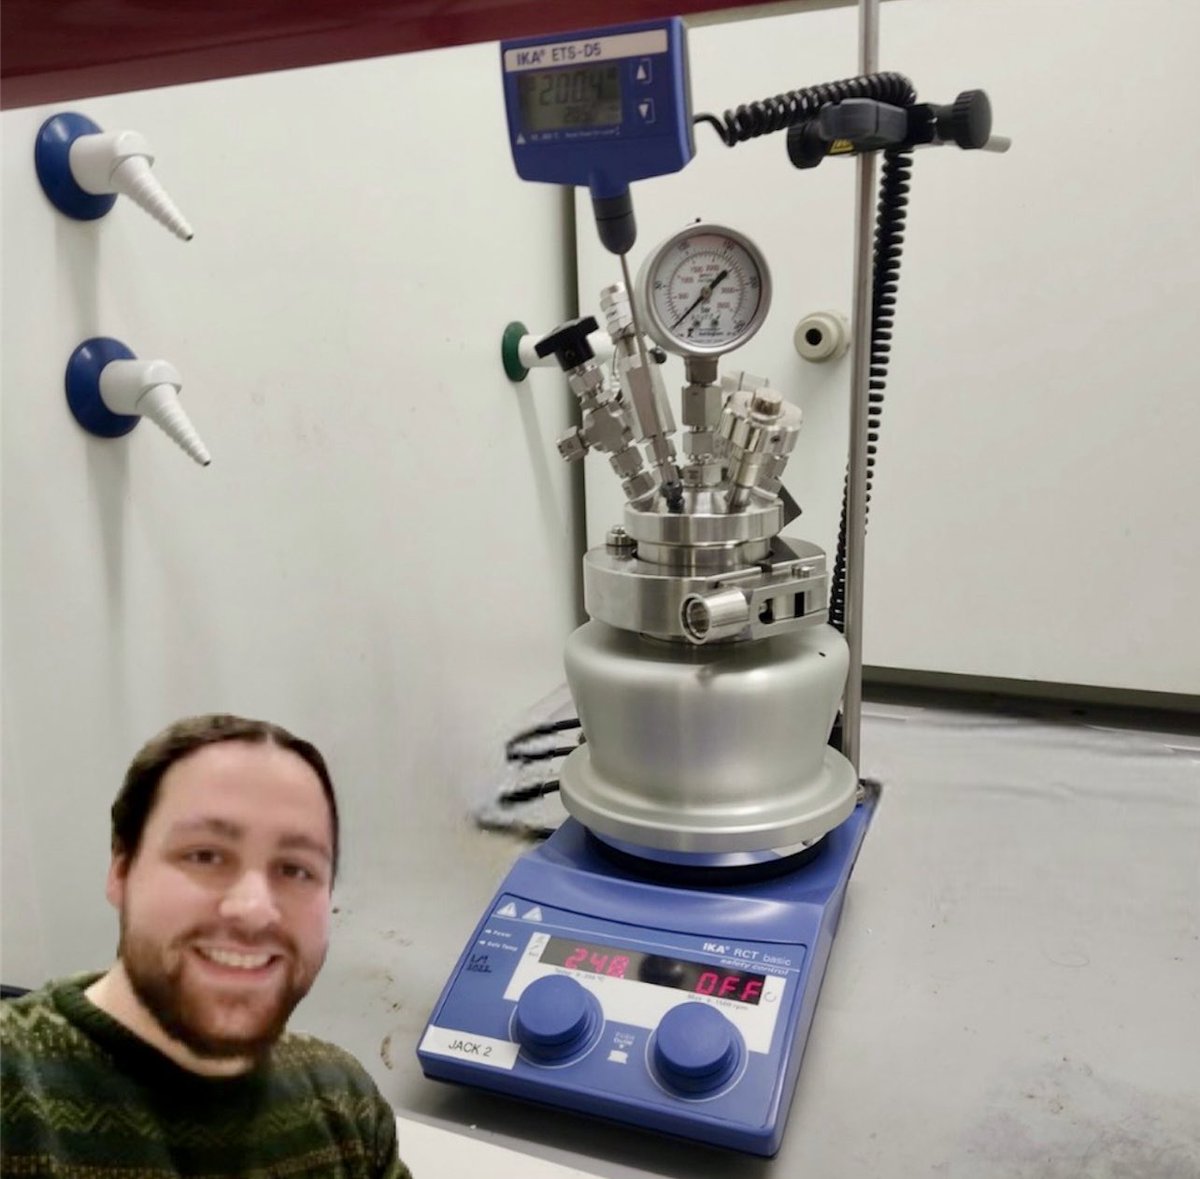 Can you handle the pressure? @LEMacKz can. Utilising the PressureSyn from @Asynt (developed by @1stevehowdle @ChemistryUoN) Lewis is able to perform reactions at high pressure safety & easily. Check out all the latest from his group’s website @StrathChem #RealTimeChem